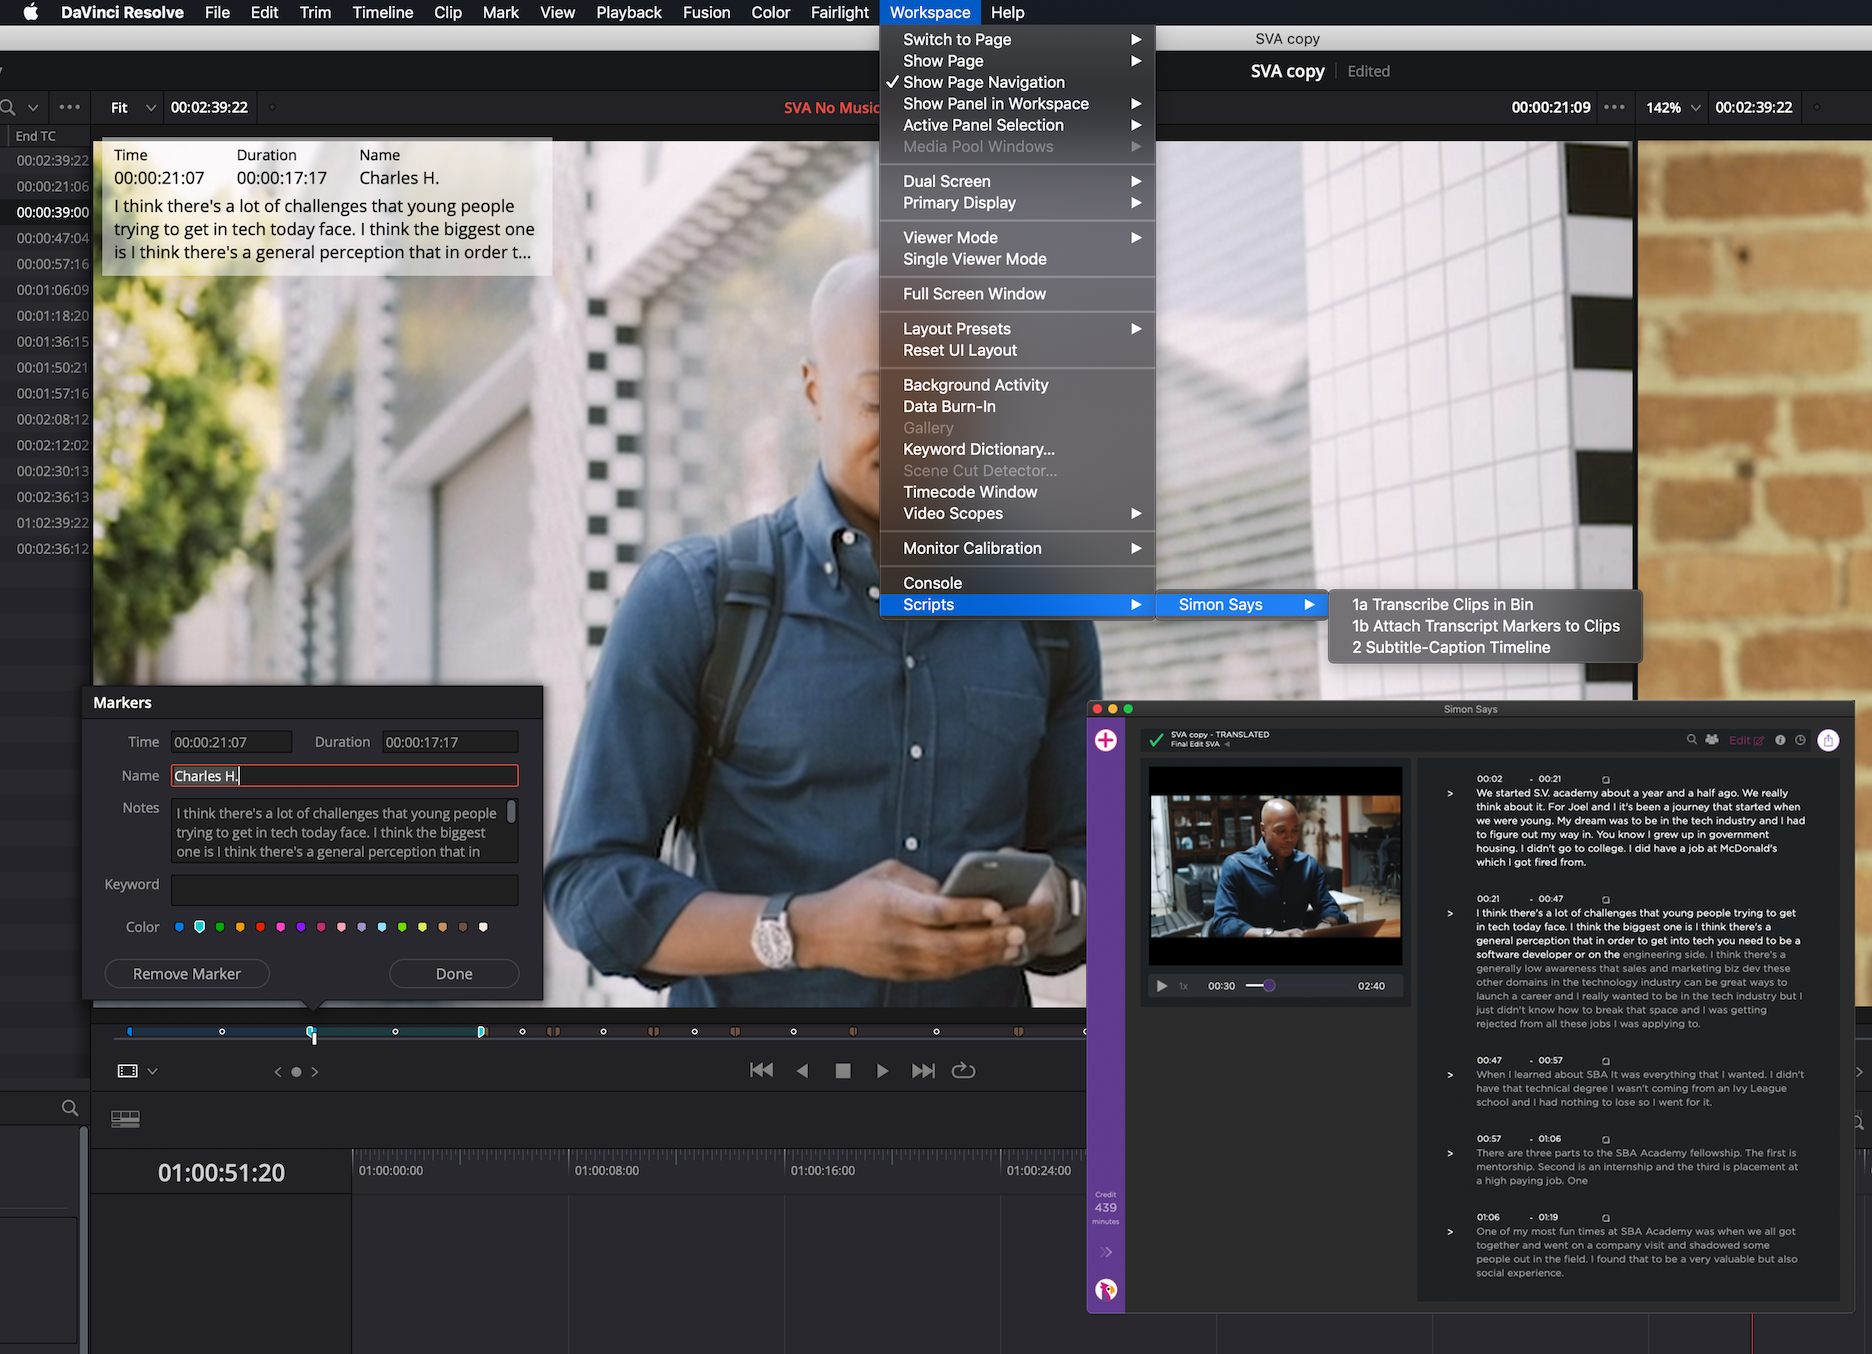 Subtitle markers in DaVinci Resolve with Simon Says